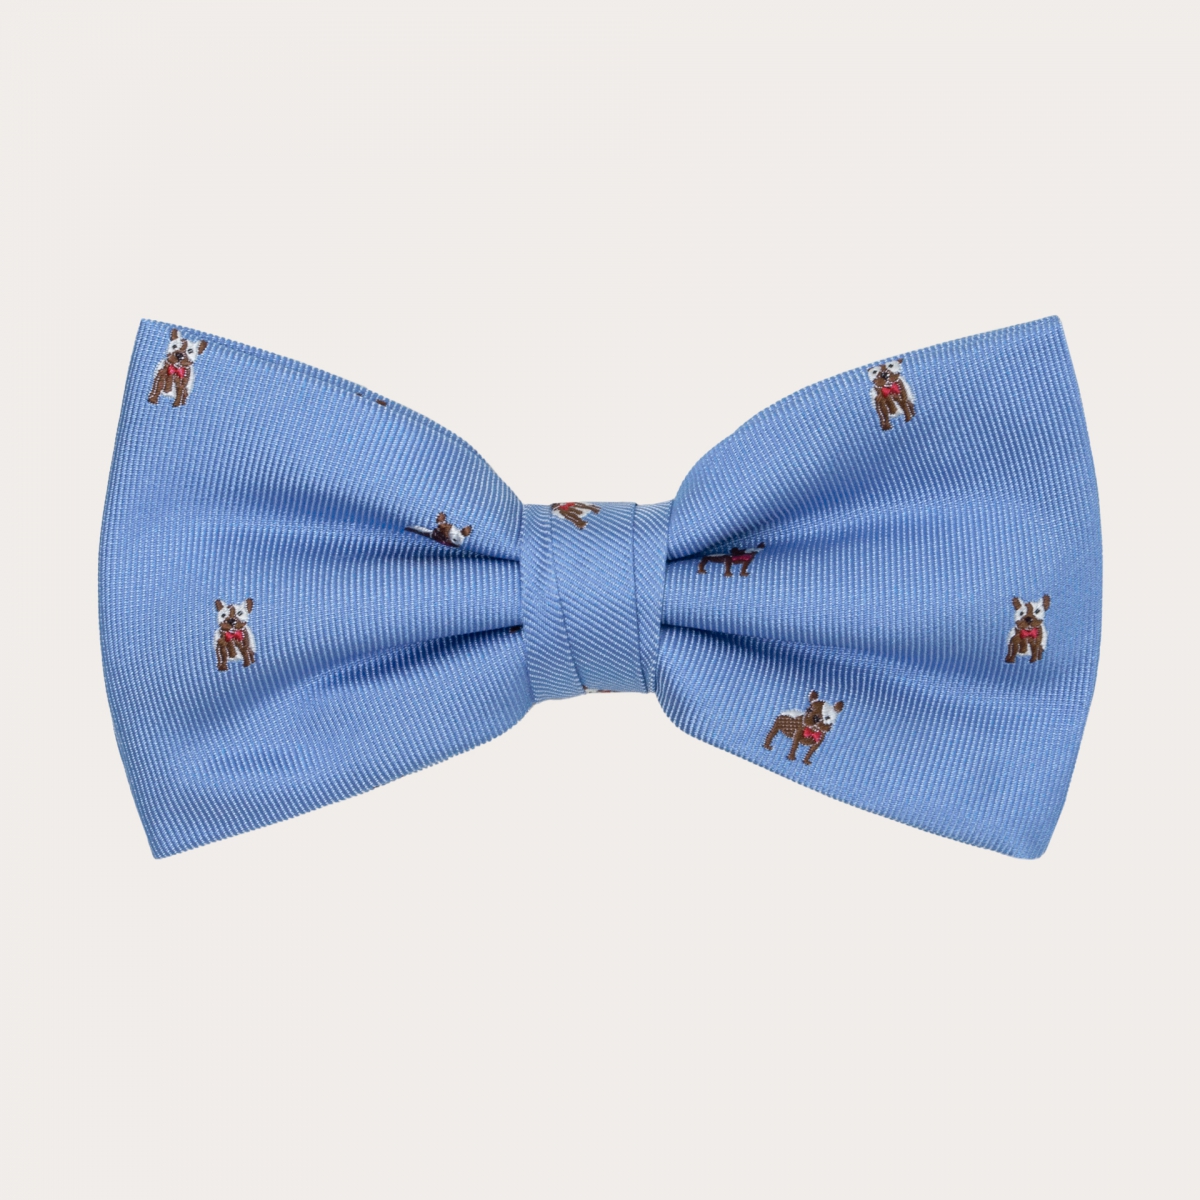 Silk pre-tied bow tie, light blue with  french bulldog design